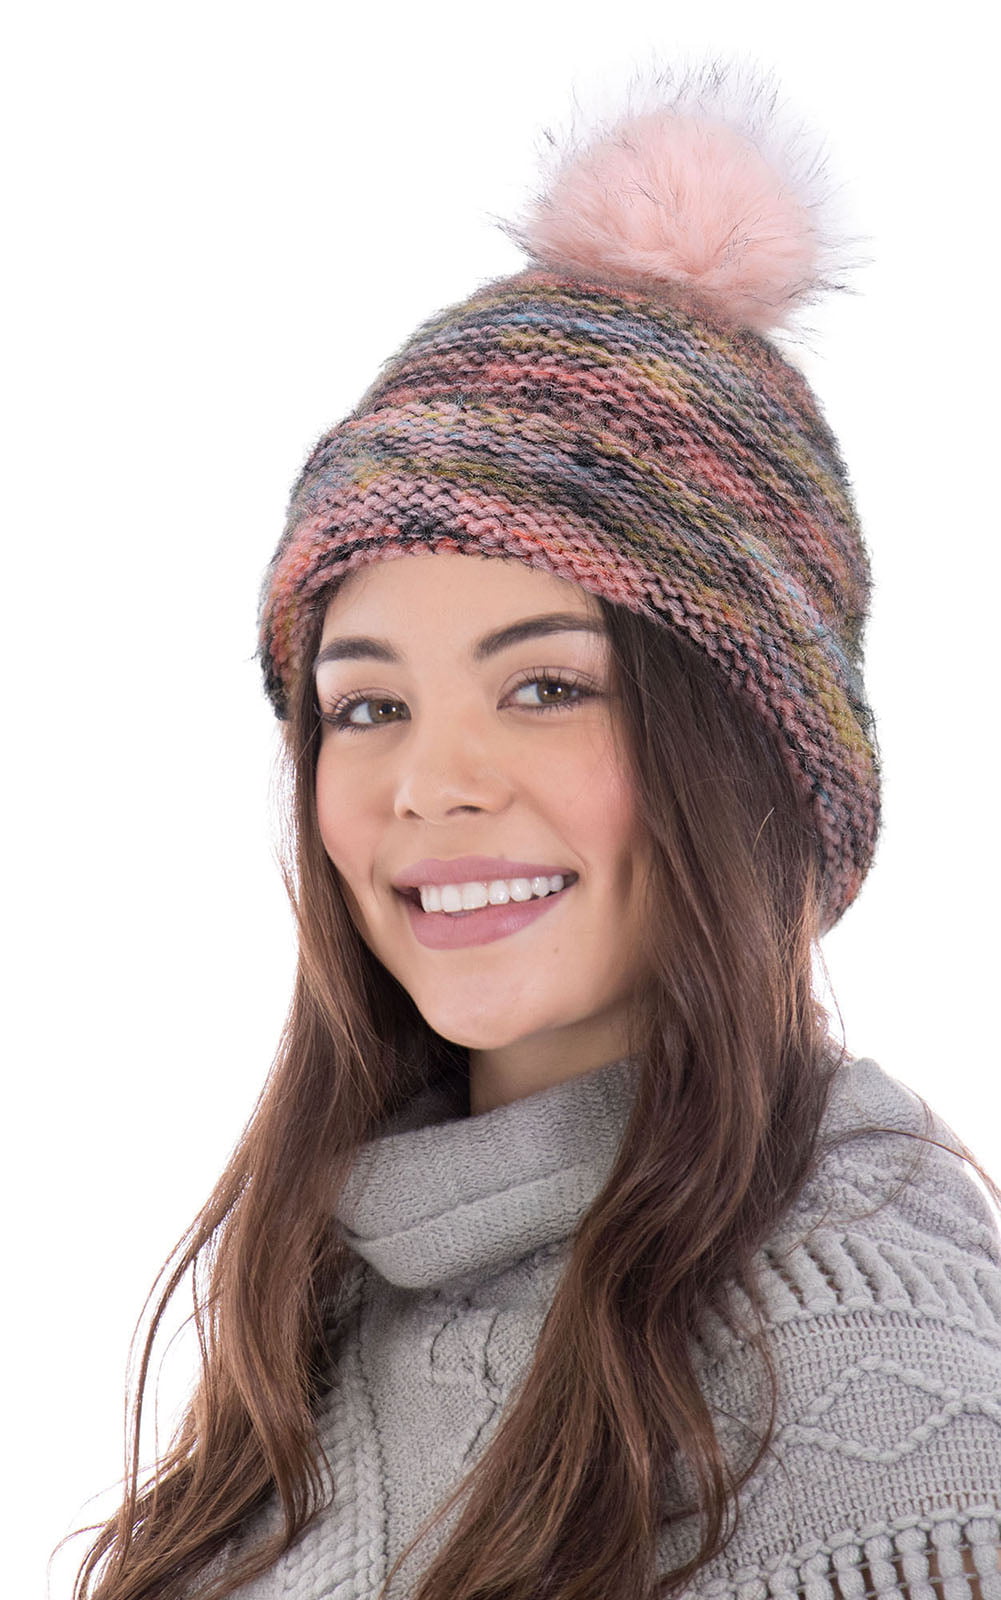 WOMENS LADIES CHUNKY STRIPED CABLE KNITTED BEANIE HAT WITH POM POM PINK PURPLE 